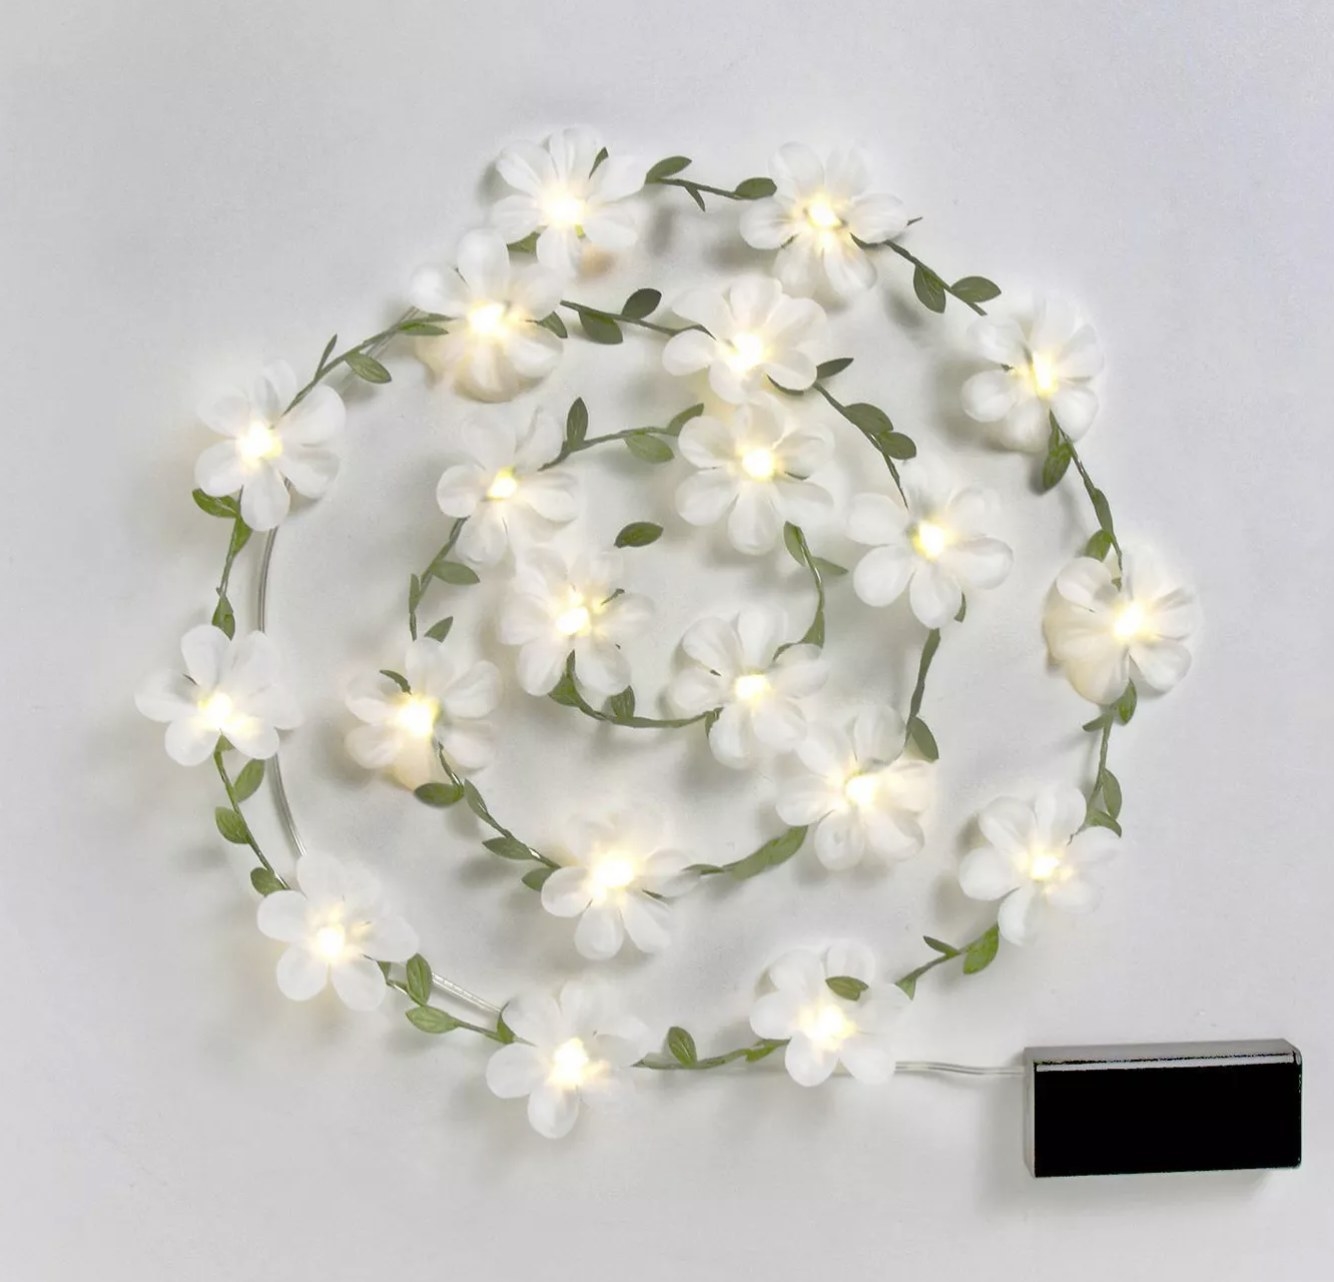 The white floral string lights have small green leaves and 20 warm bulbs